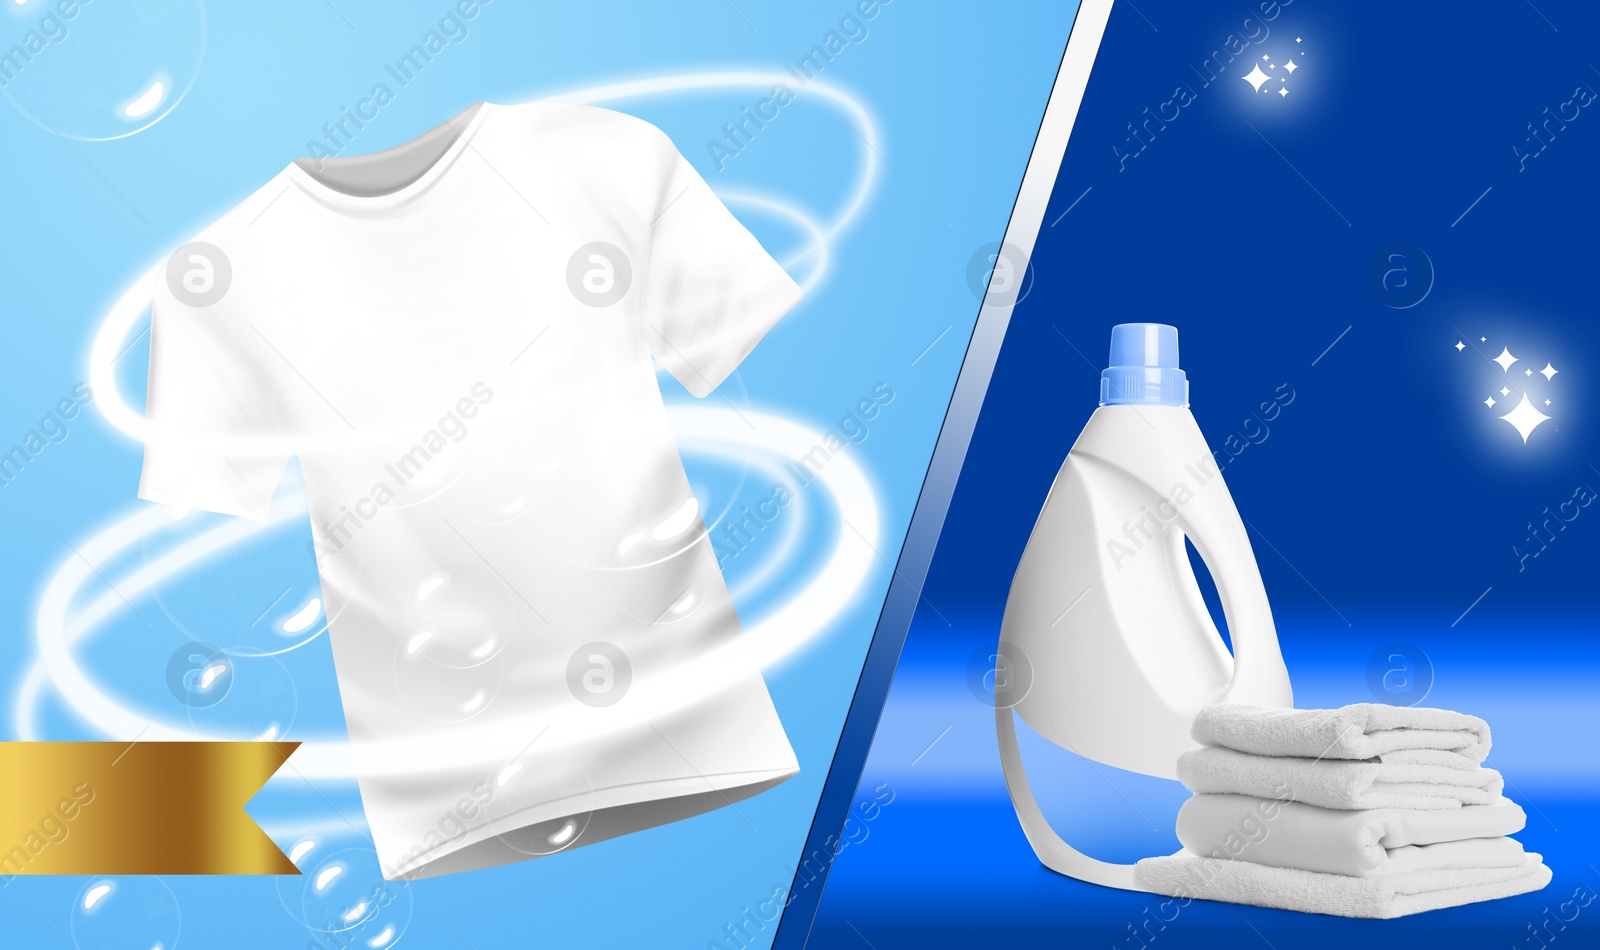 Image of Fabric softener advertising design. White t-shirt, bottle of conditioner and soft clean towels on blue background